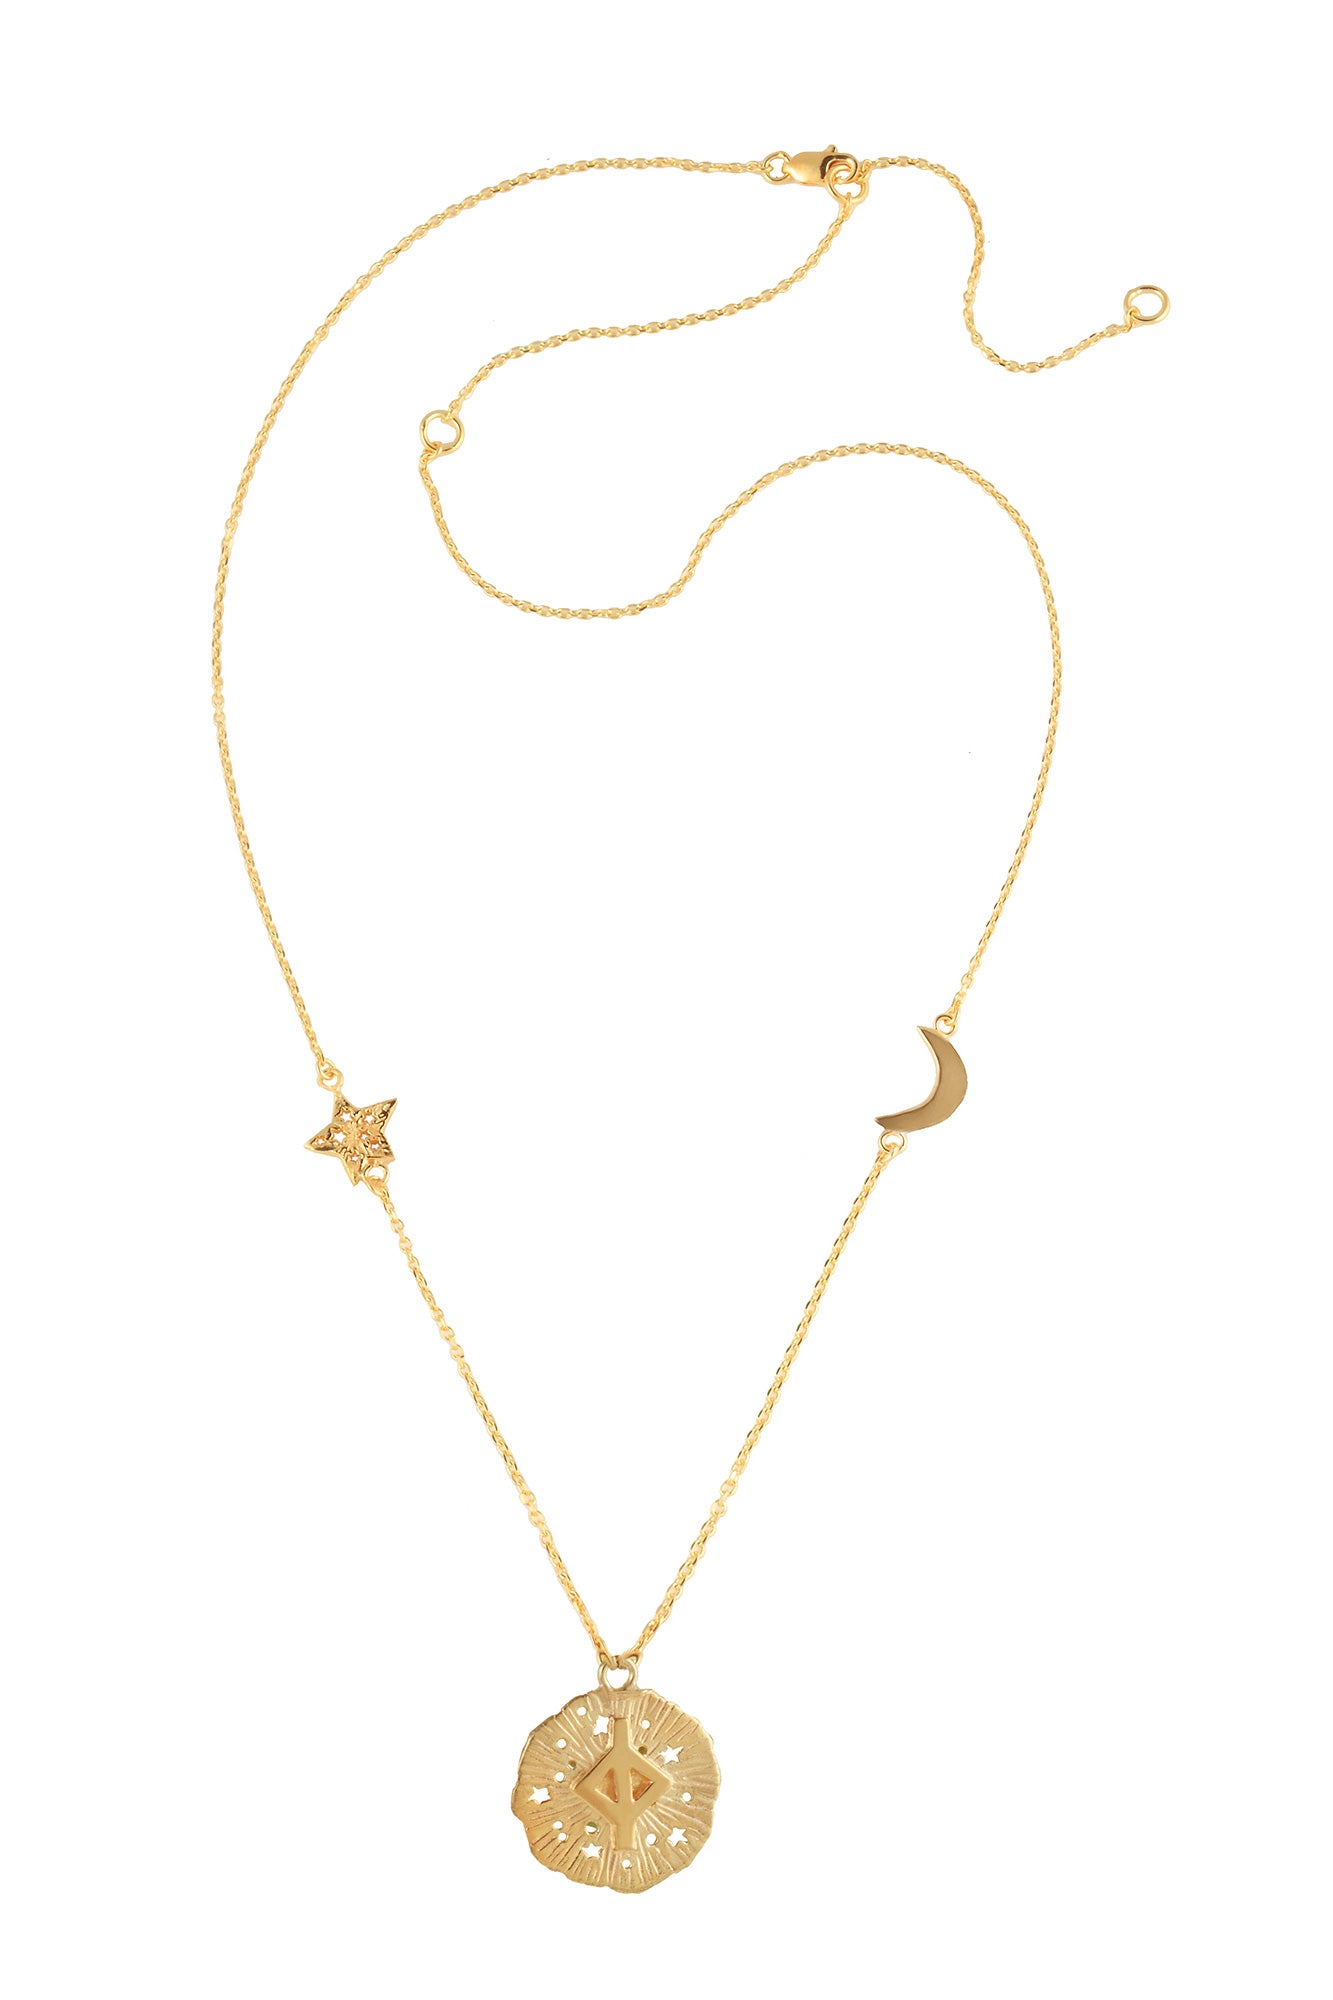 Chain necklace with small runic pendant Jera, star and moon, 46 сm. Gold plated